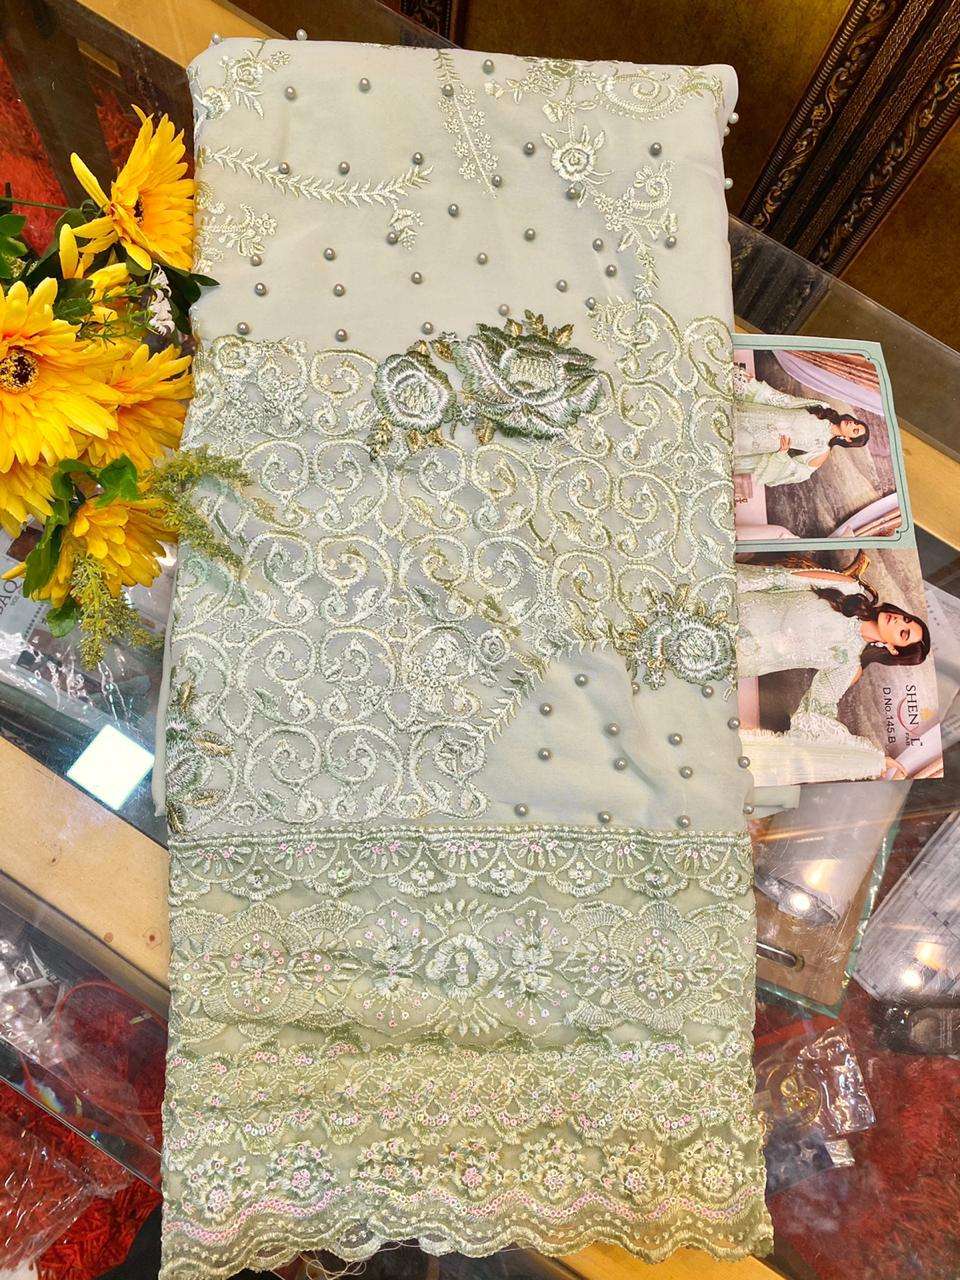 SHENYL 145 COLOUR BY SHENYL FAB 145-A TO 145-E BEAUTIFUL PAKISTANI SUITS COLORFUL STYLISH FANCY CASUAL WEAR & ETHNIC WEAR FAUX GEORGETTE EMBROIDERED DRESSES AT WHOLESALE PRICE